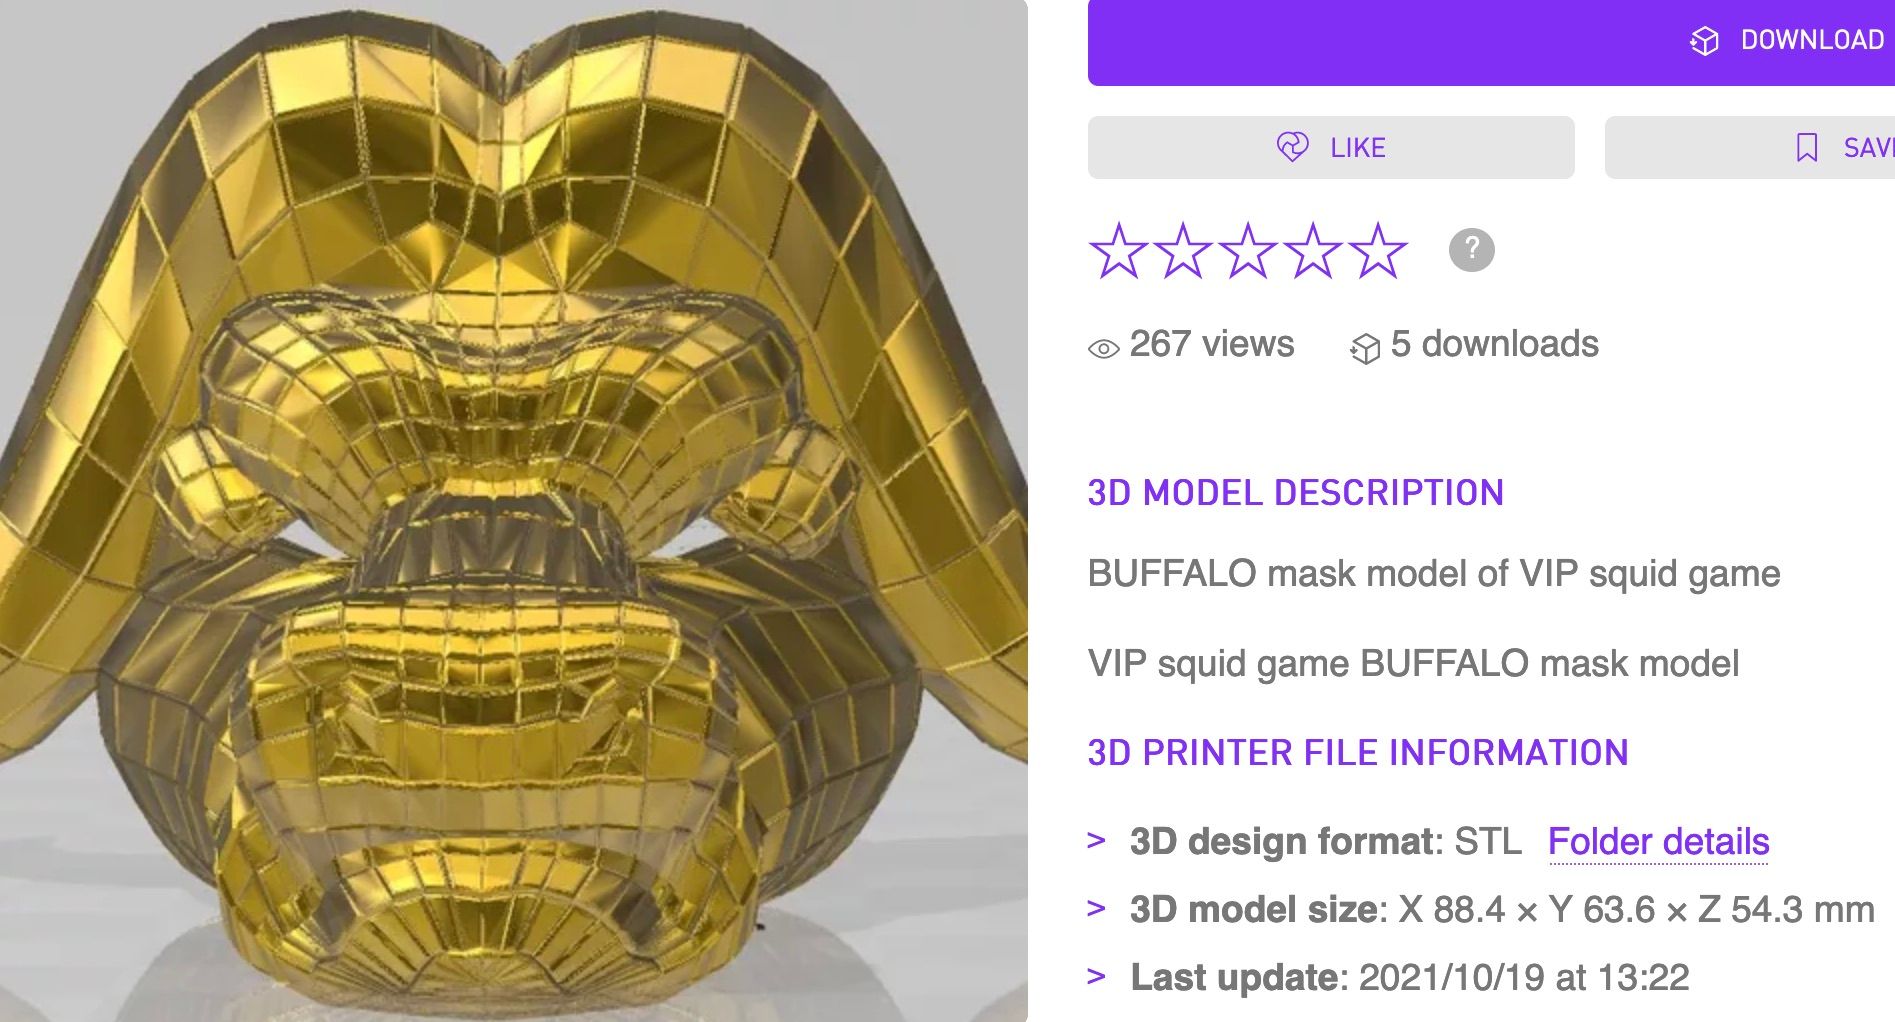 A 3D model of a golden buffalo mask next to information about the designer